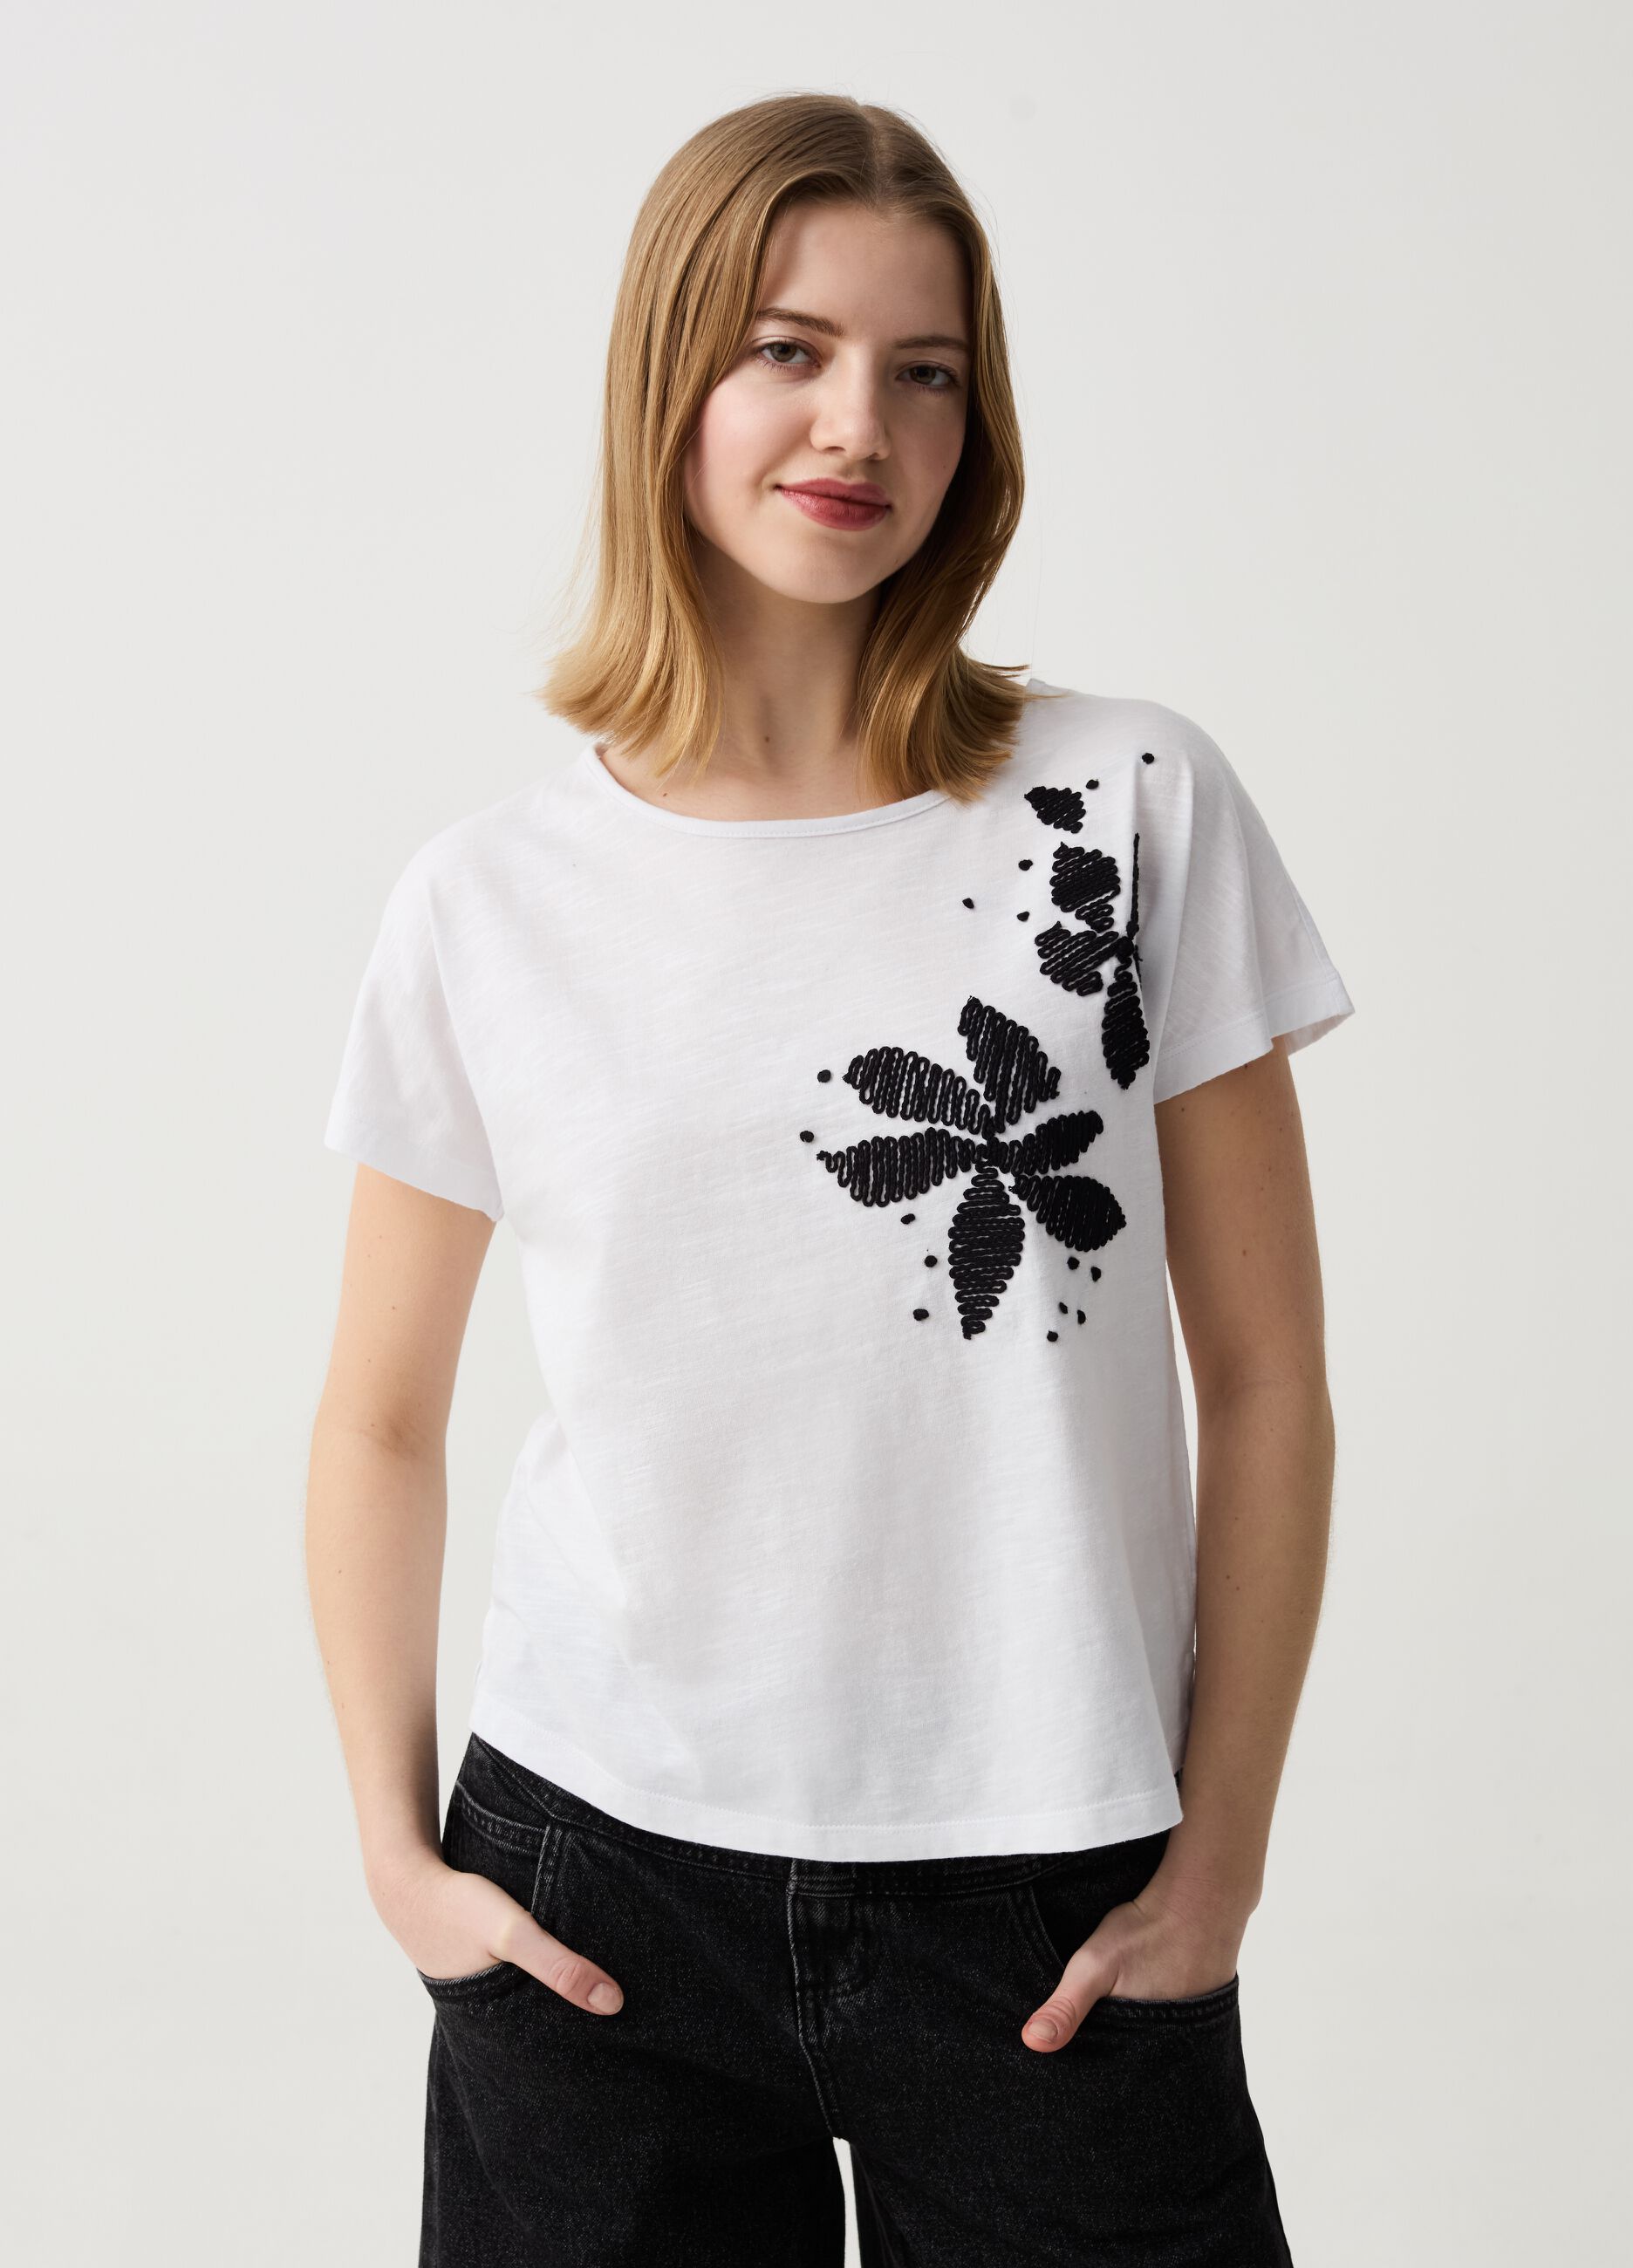 Cotton T-shirt with flowers embroidery